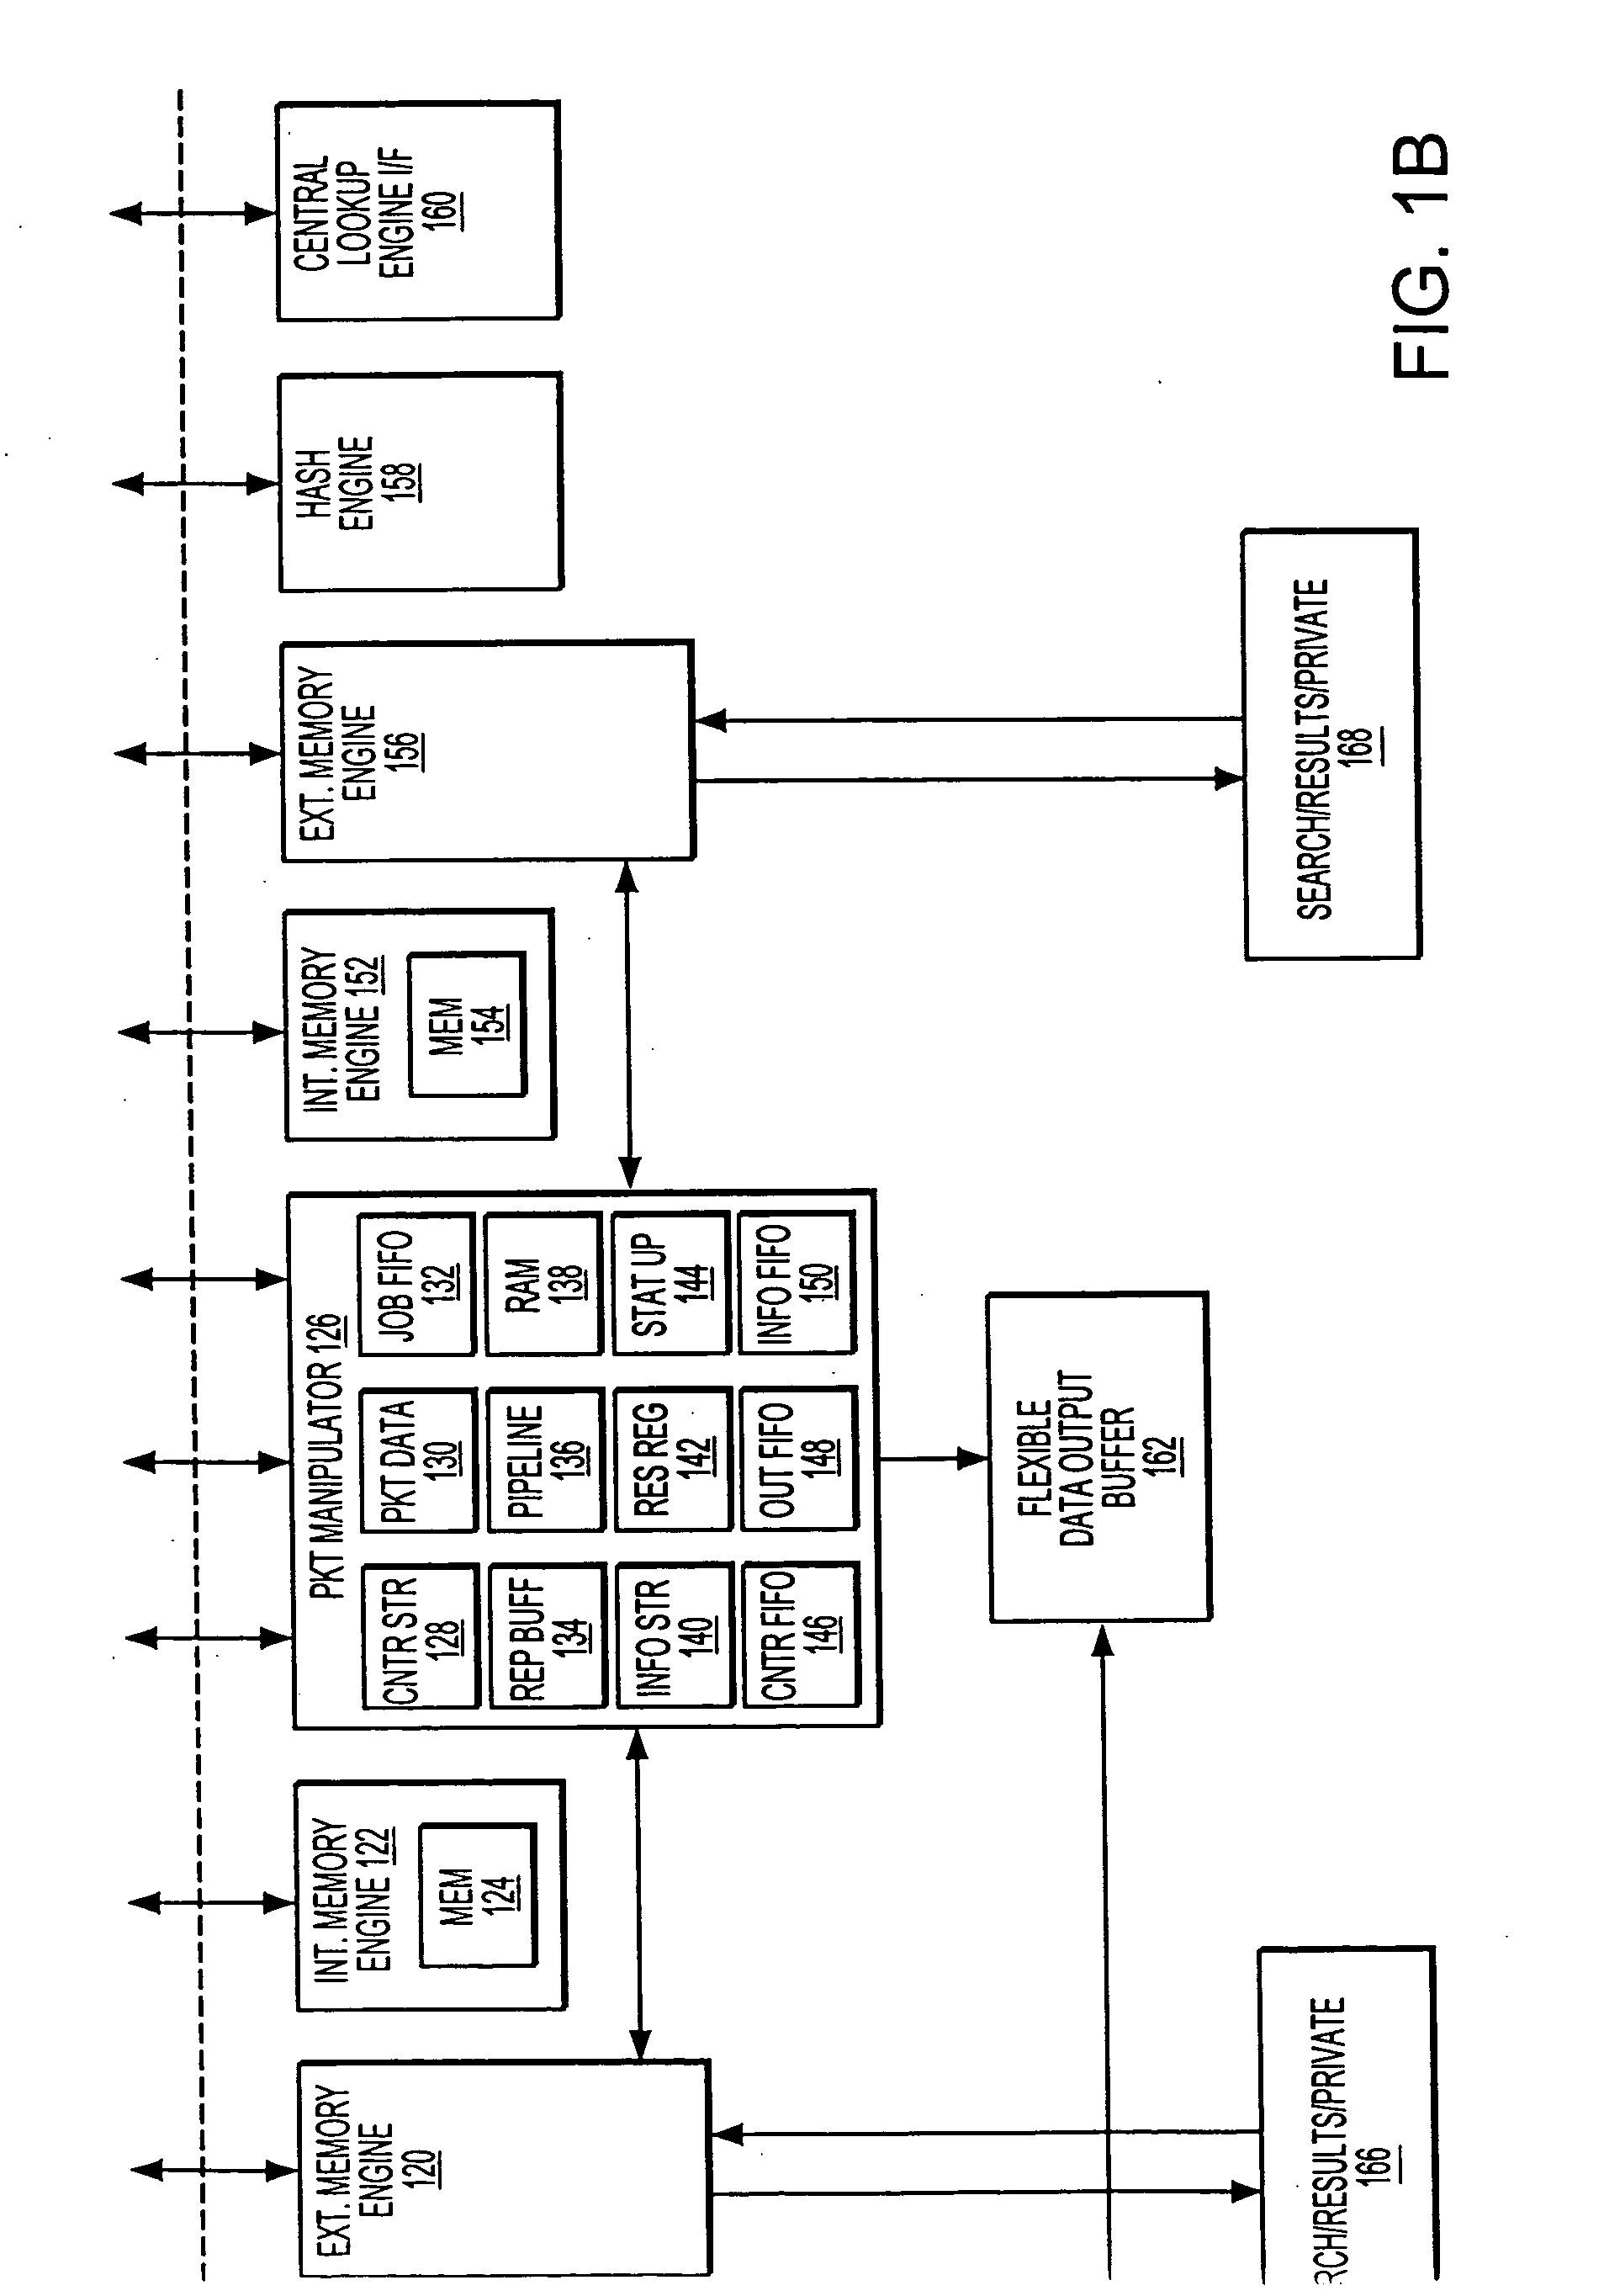 External memory engine selectable pipeline architecture